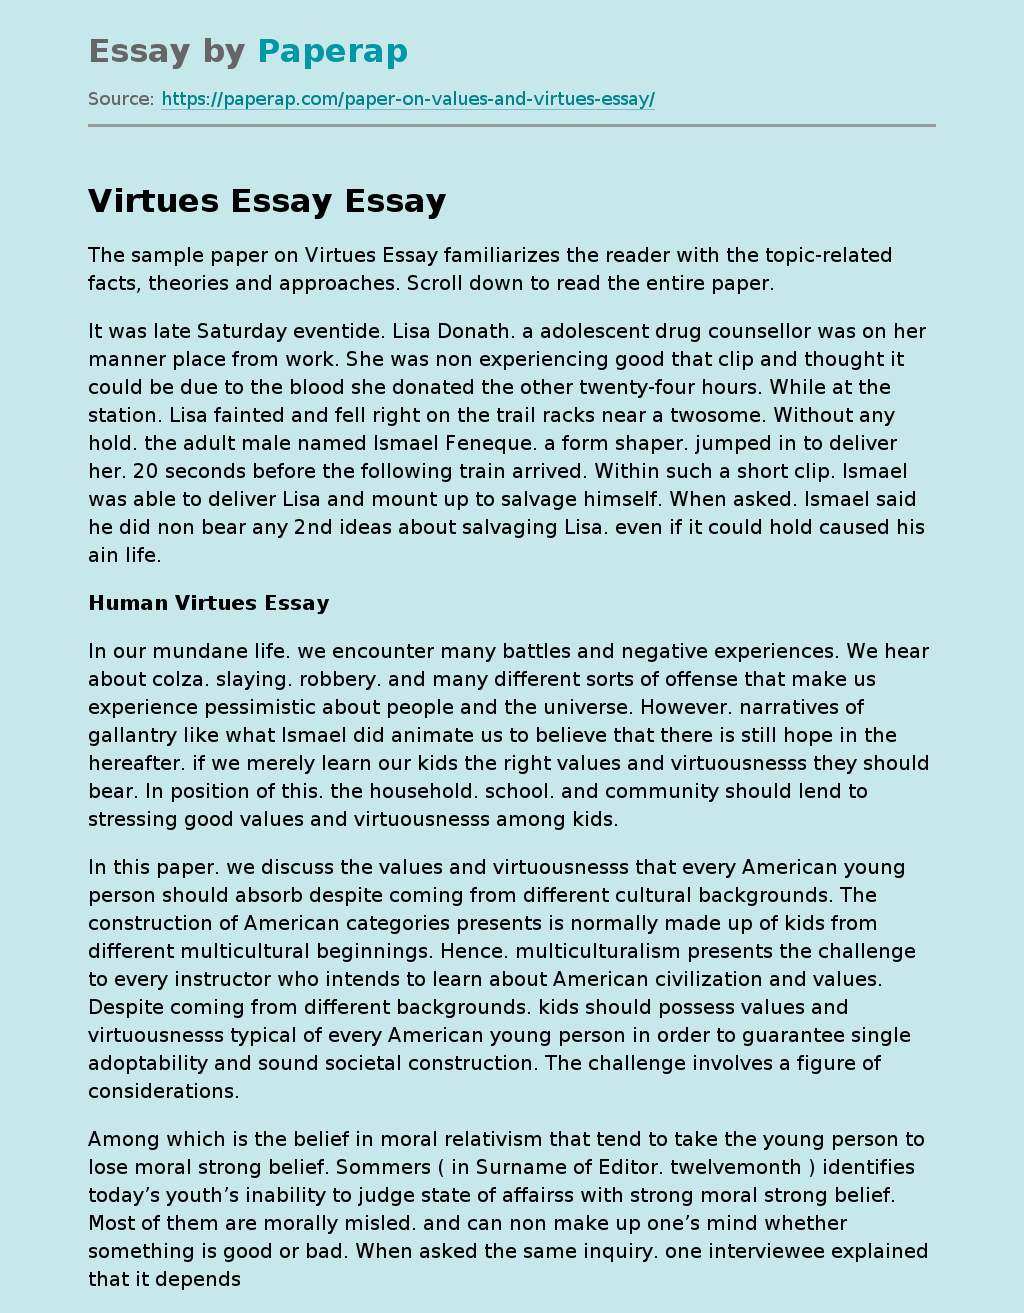 Virtues Essay Overview